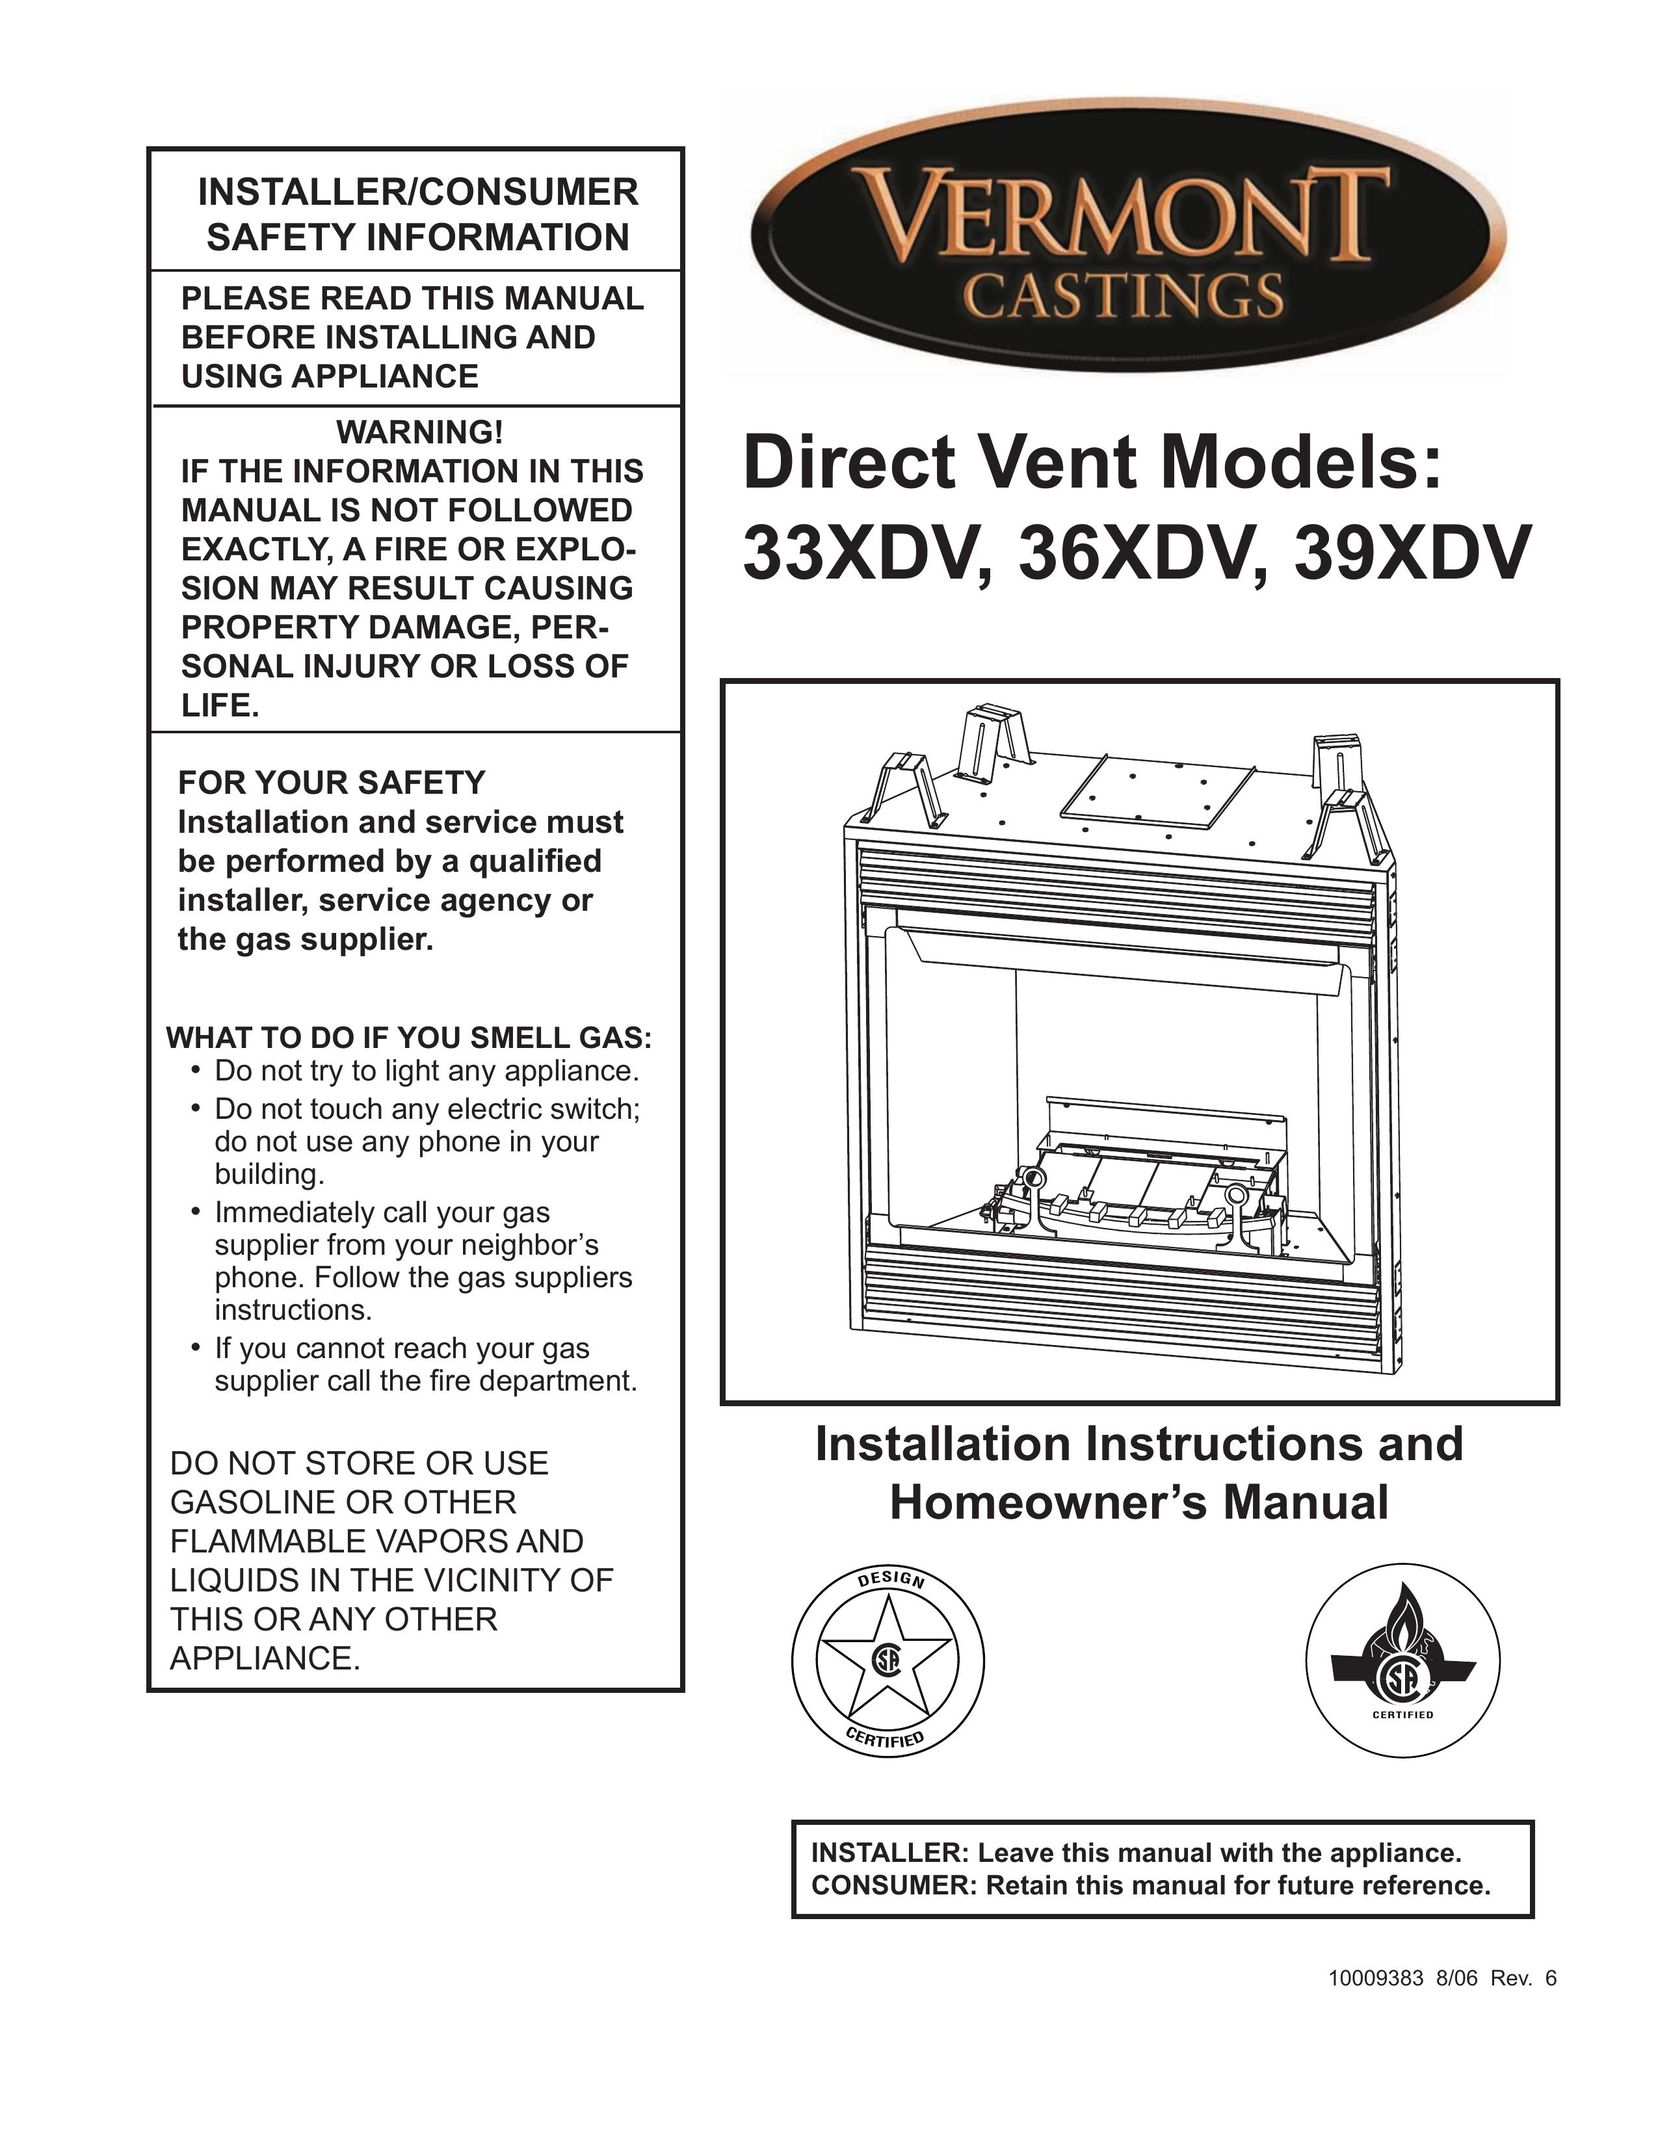 Vermont Casting 33XDV Indoor Fireplace User Manual